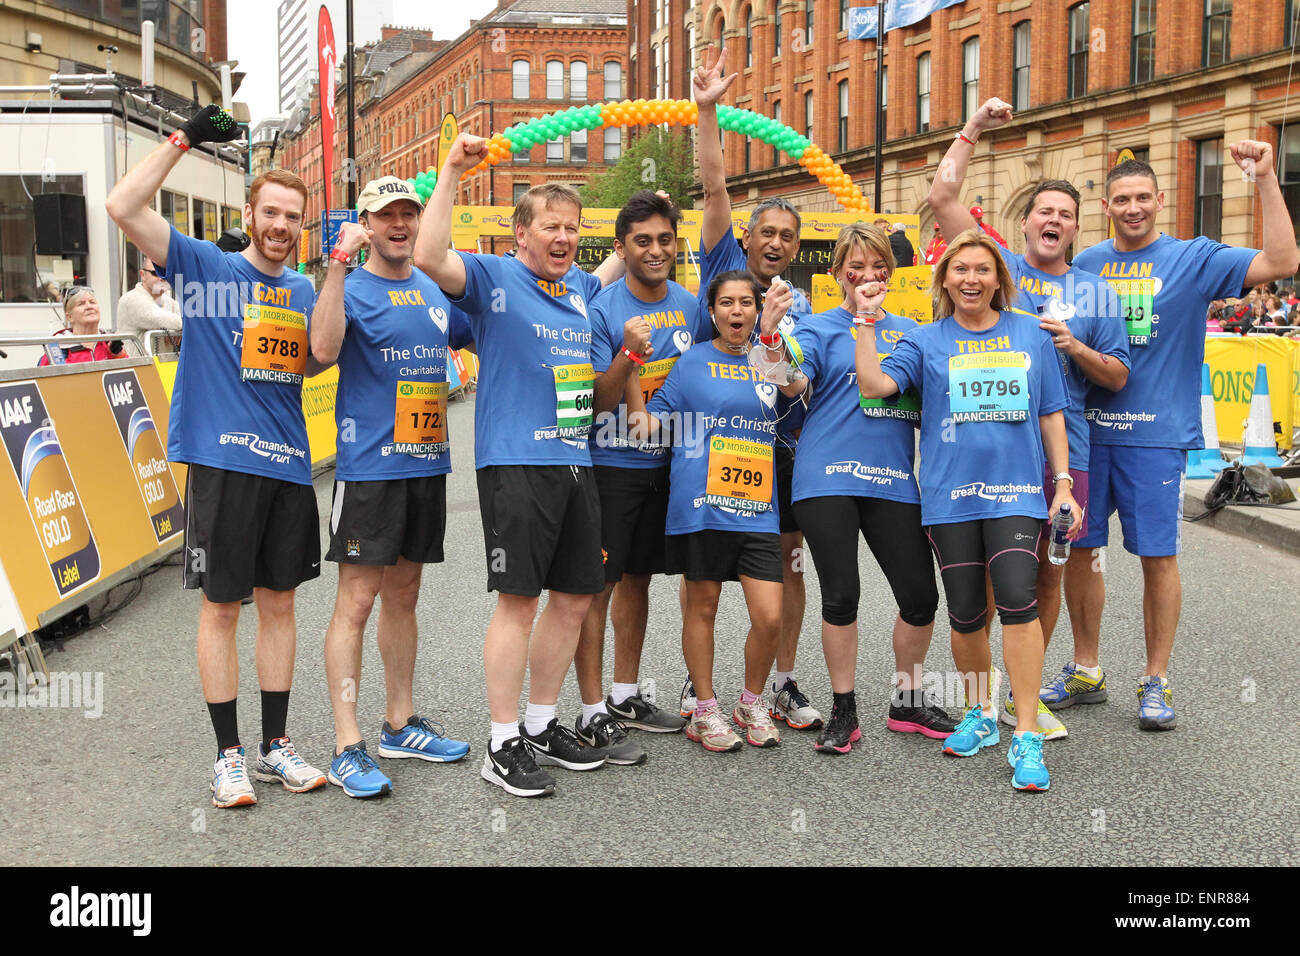 Manchester, UK. Sunday 10 May 2015. The city hosted the Morrison's Great Manchester Run in the heart of the city centre. The Christie Team including BBC presenter Bill Turnbull (3rd left) and actress Tricia Penrose (3rd right). Credit:  Michael Buddle/Alamy Live News Stock Photo